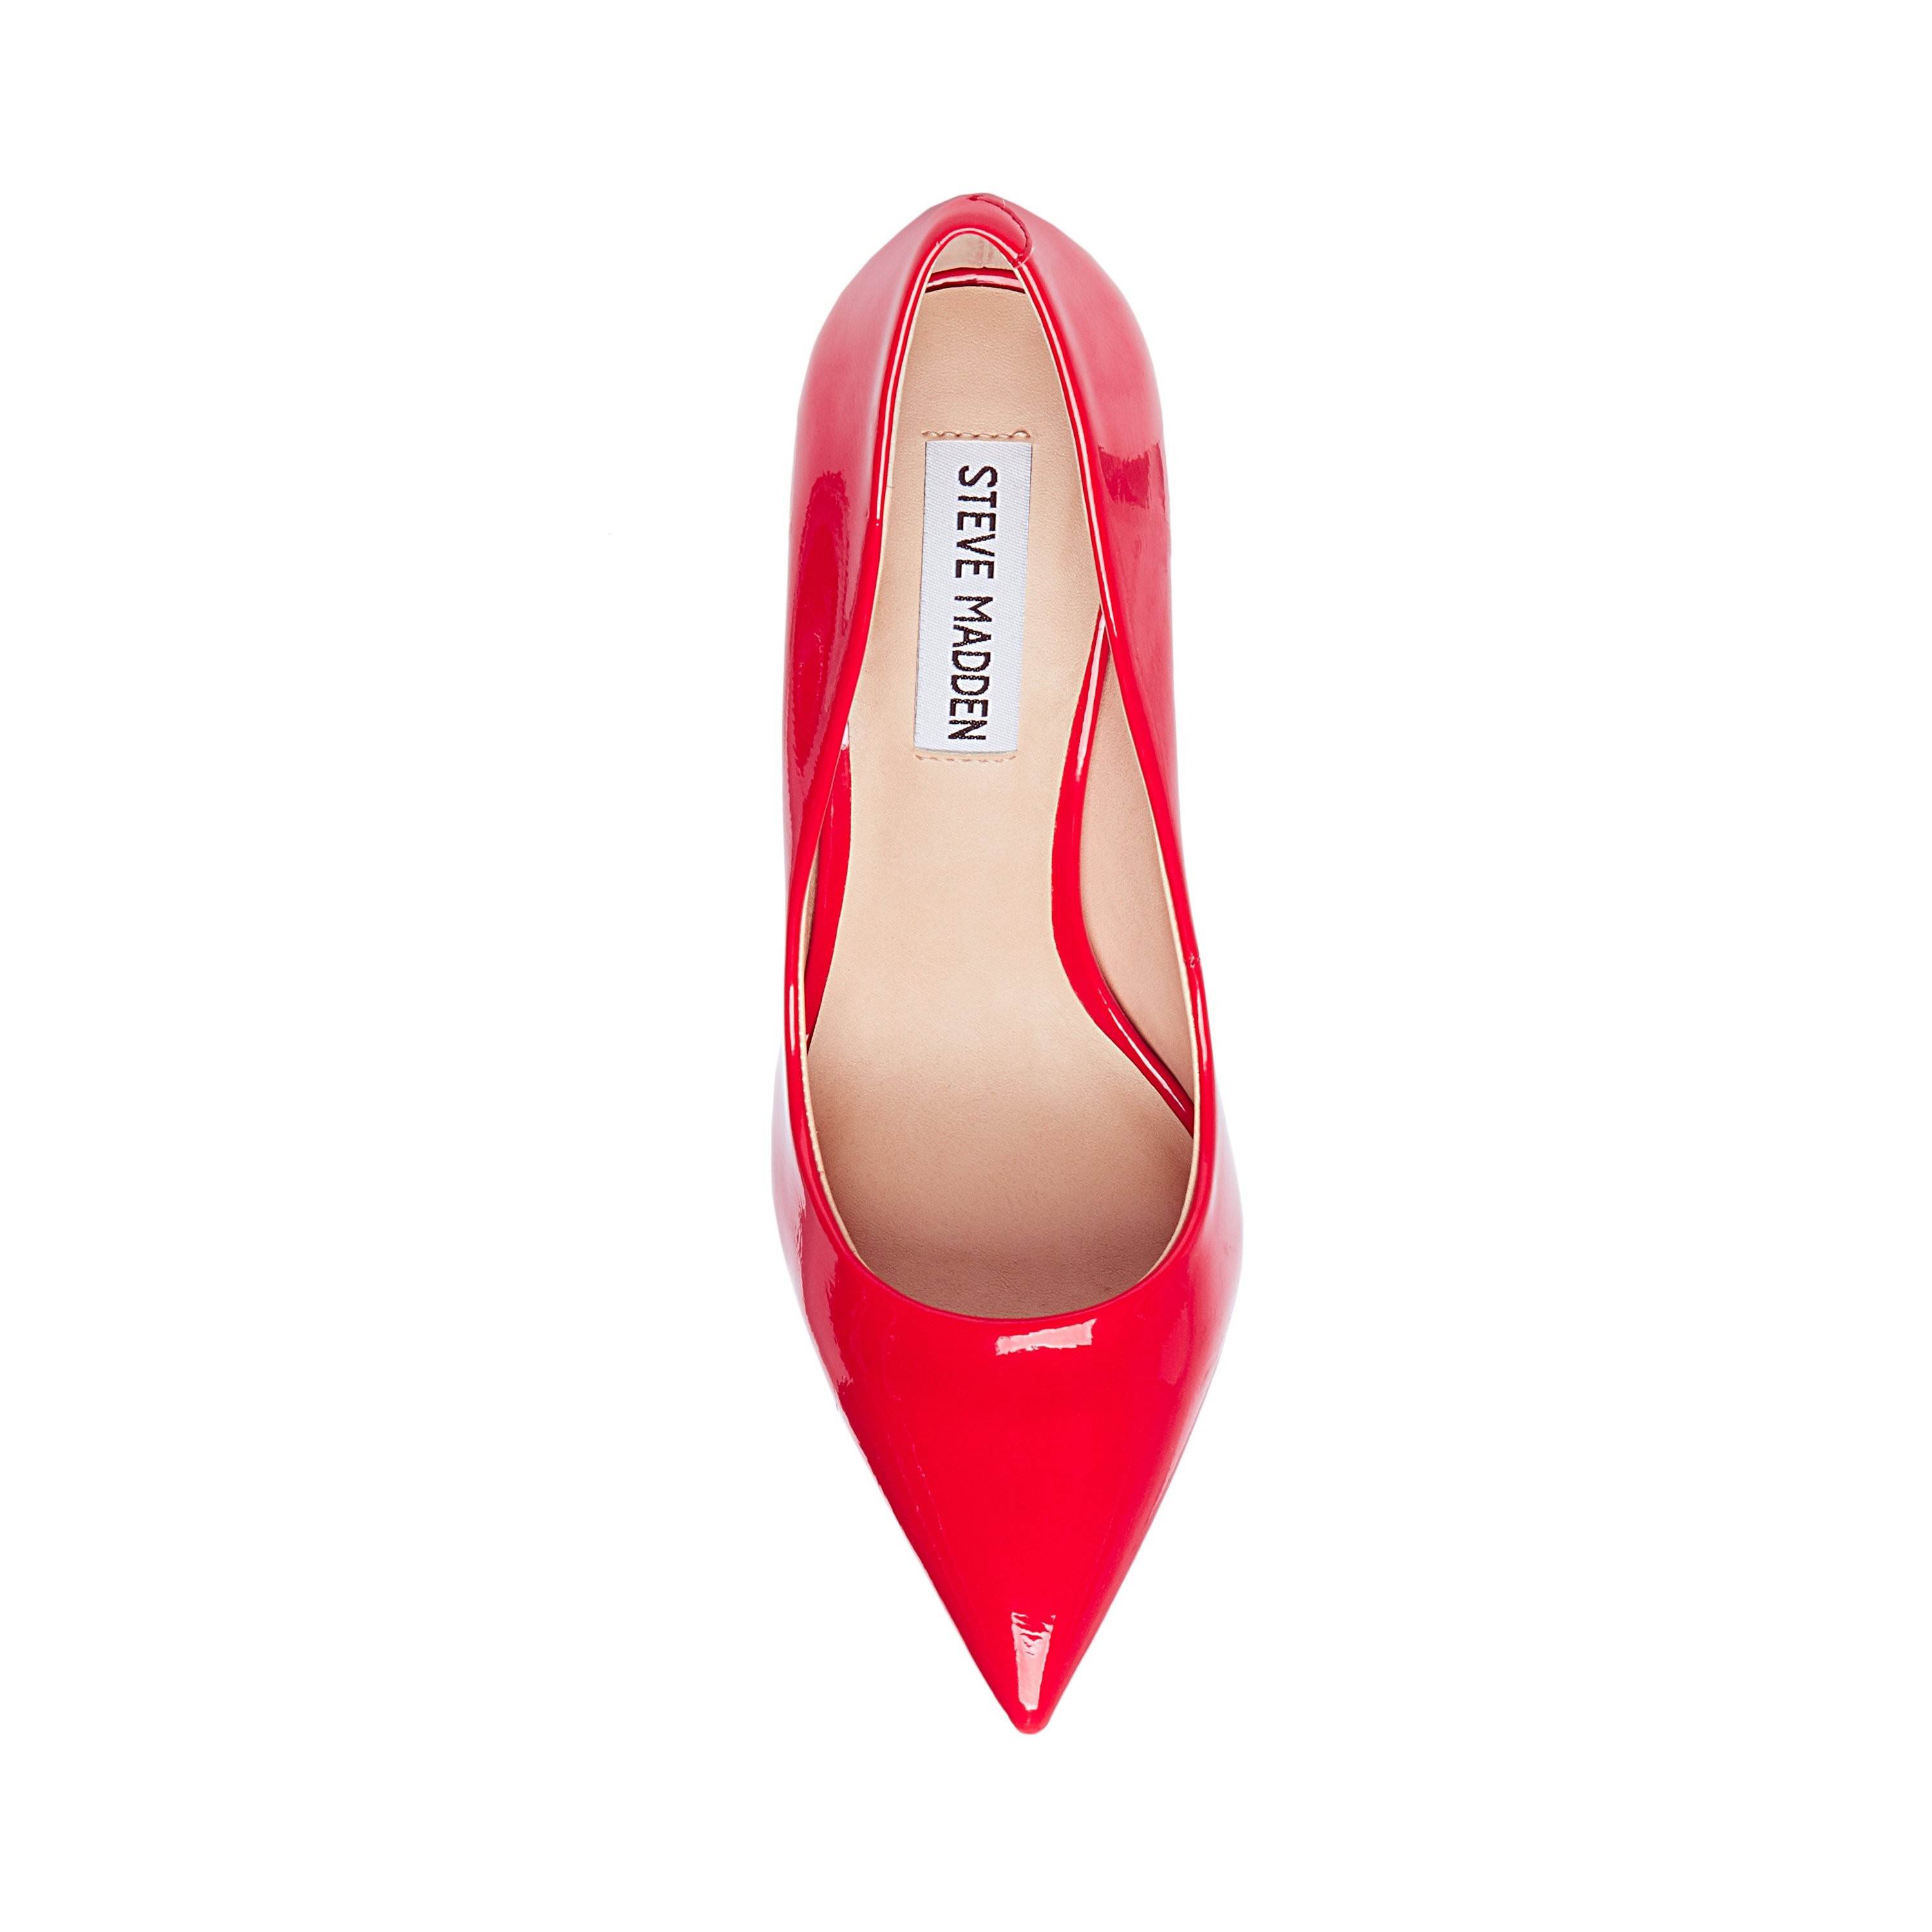 Steve Madden Daisie Pump Red SM91000743 07003 03001 - New Collection Fall Winter 2018 2019